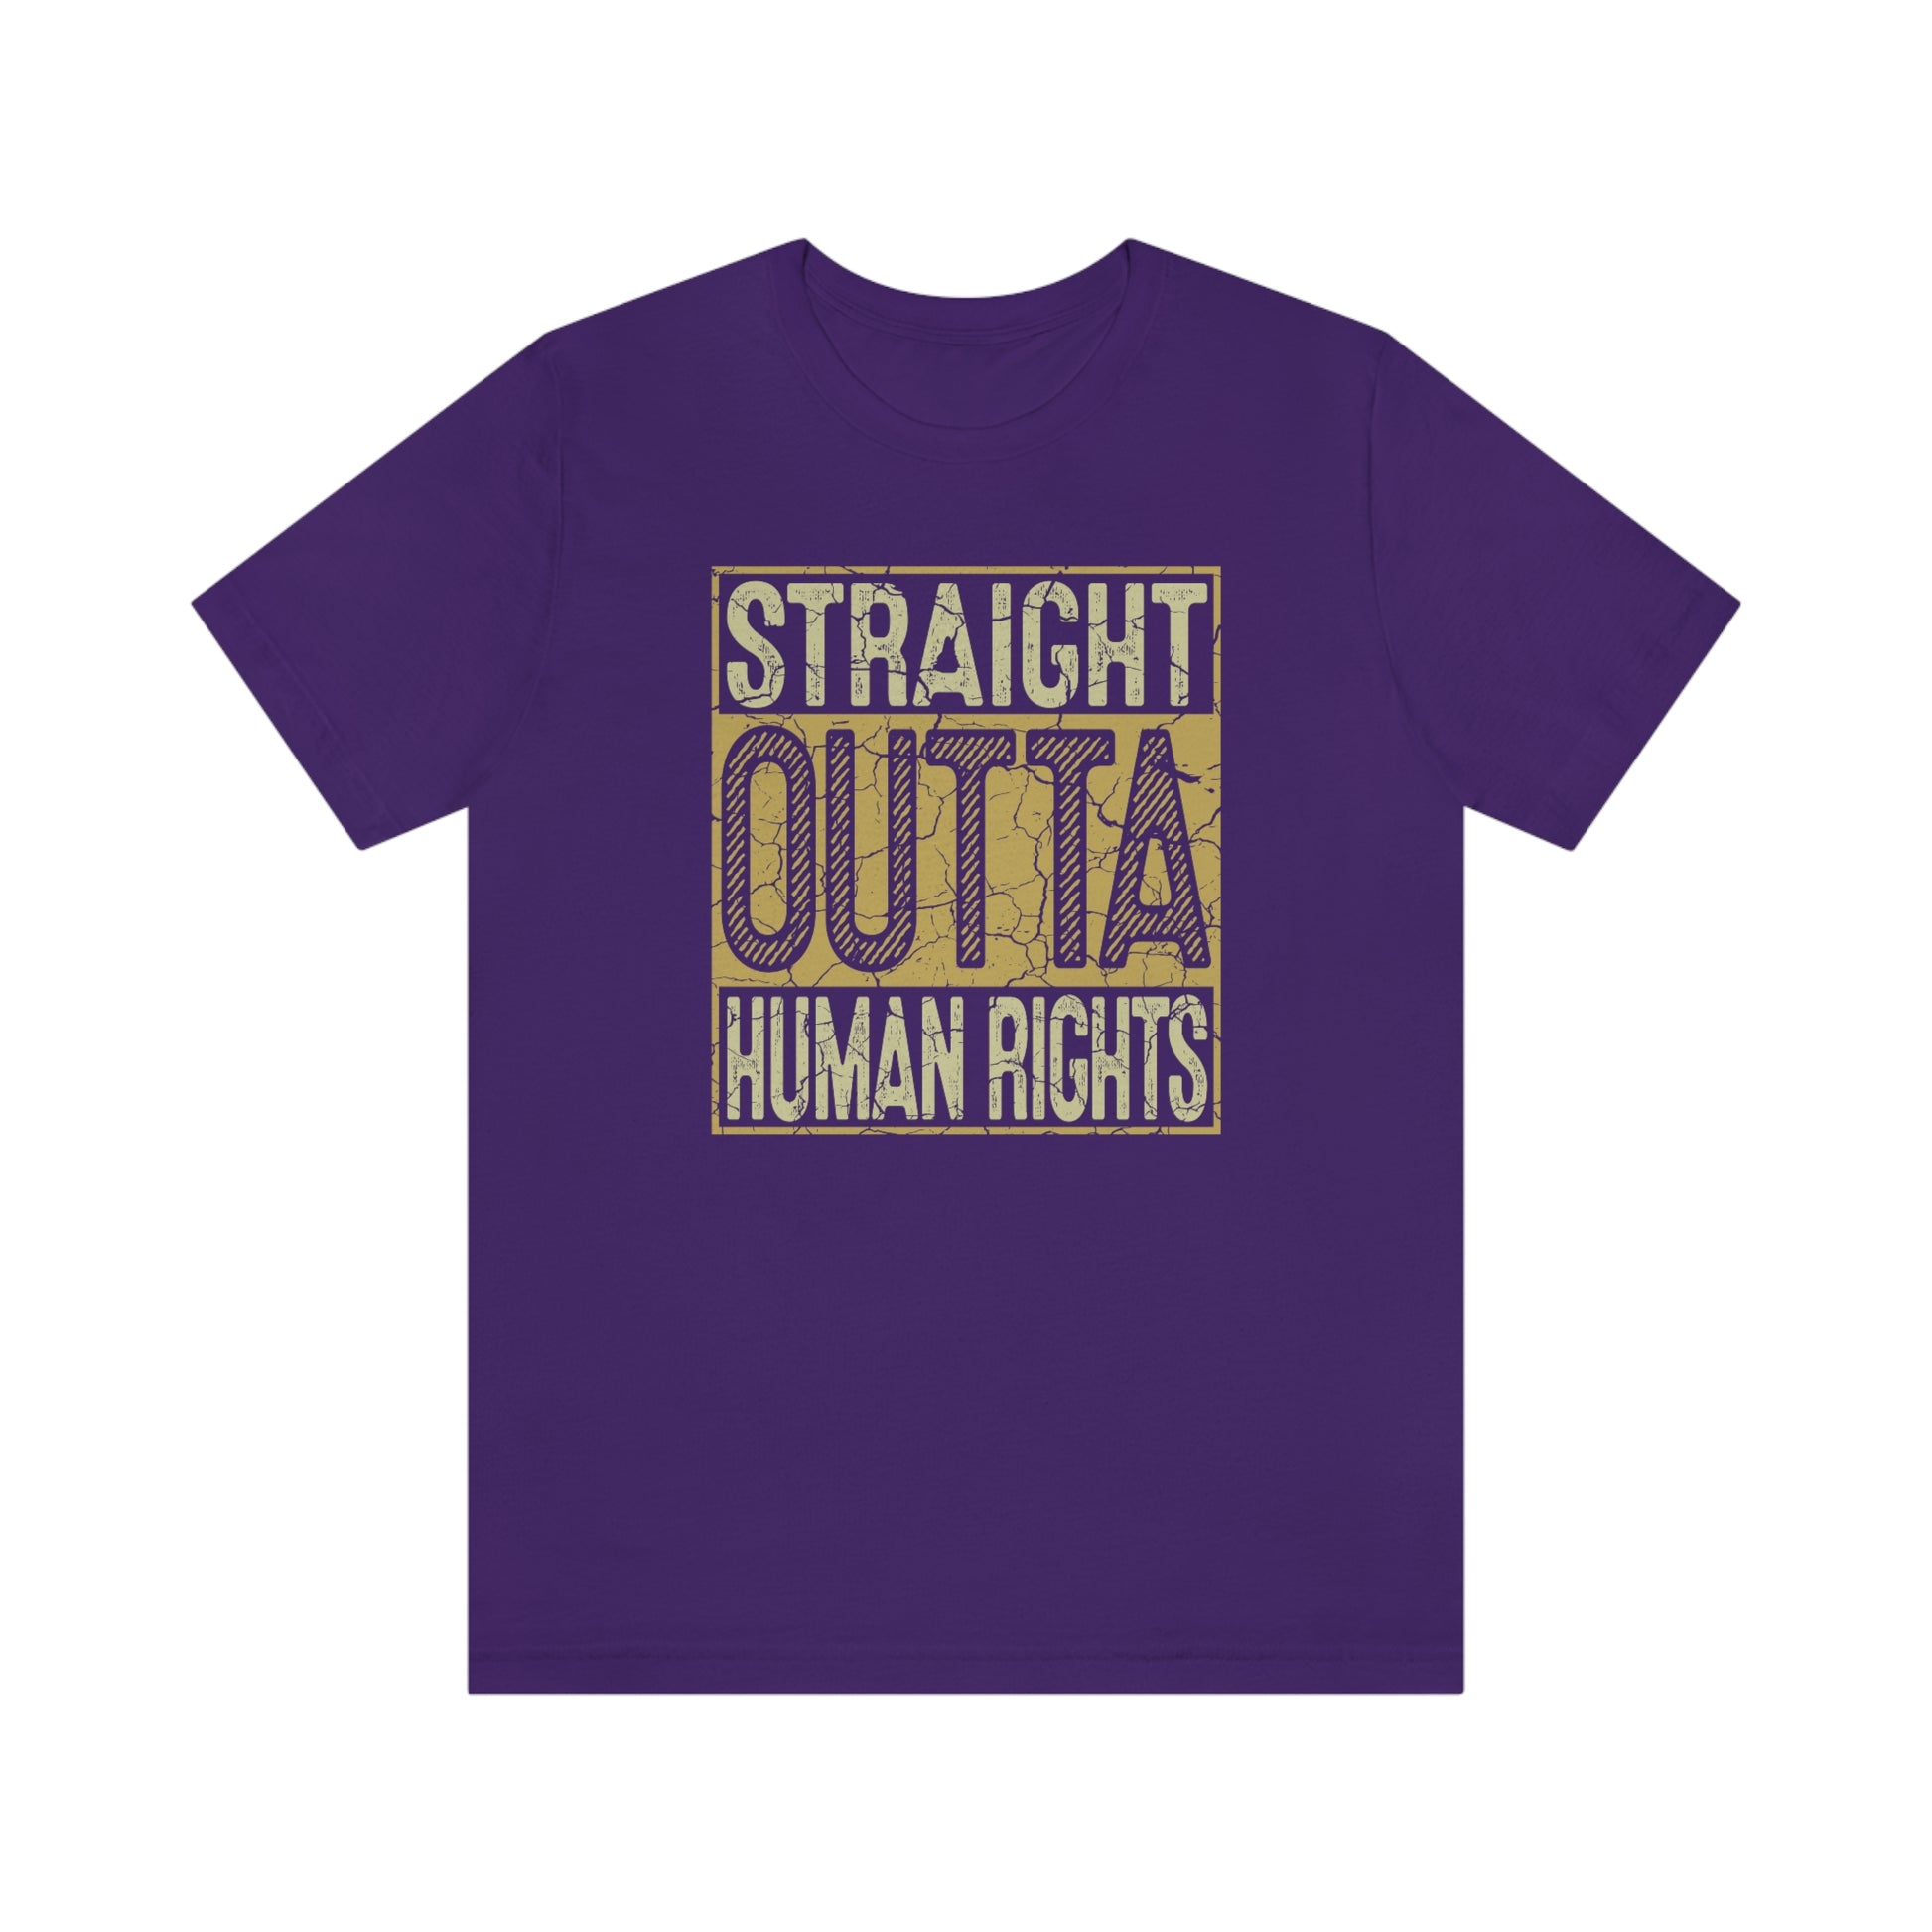 Straight Outta Human Rights t-shirt for women or men - 37 Design Unit